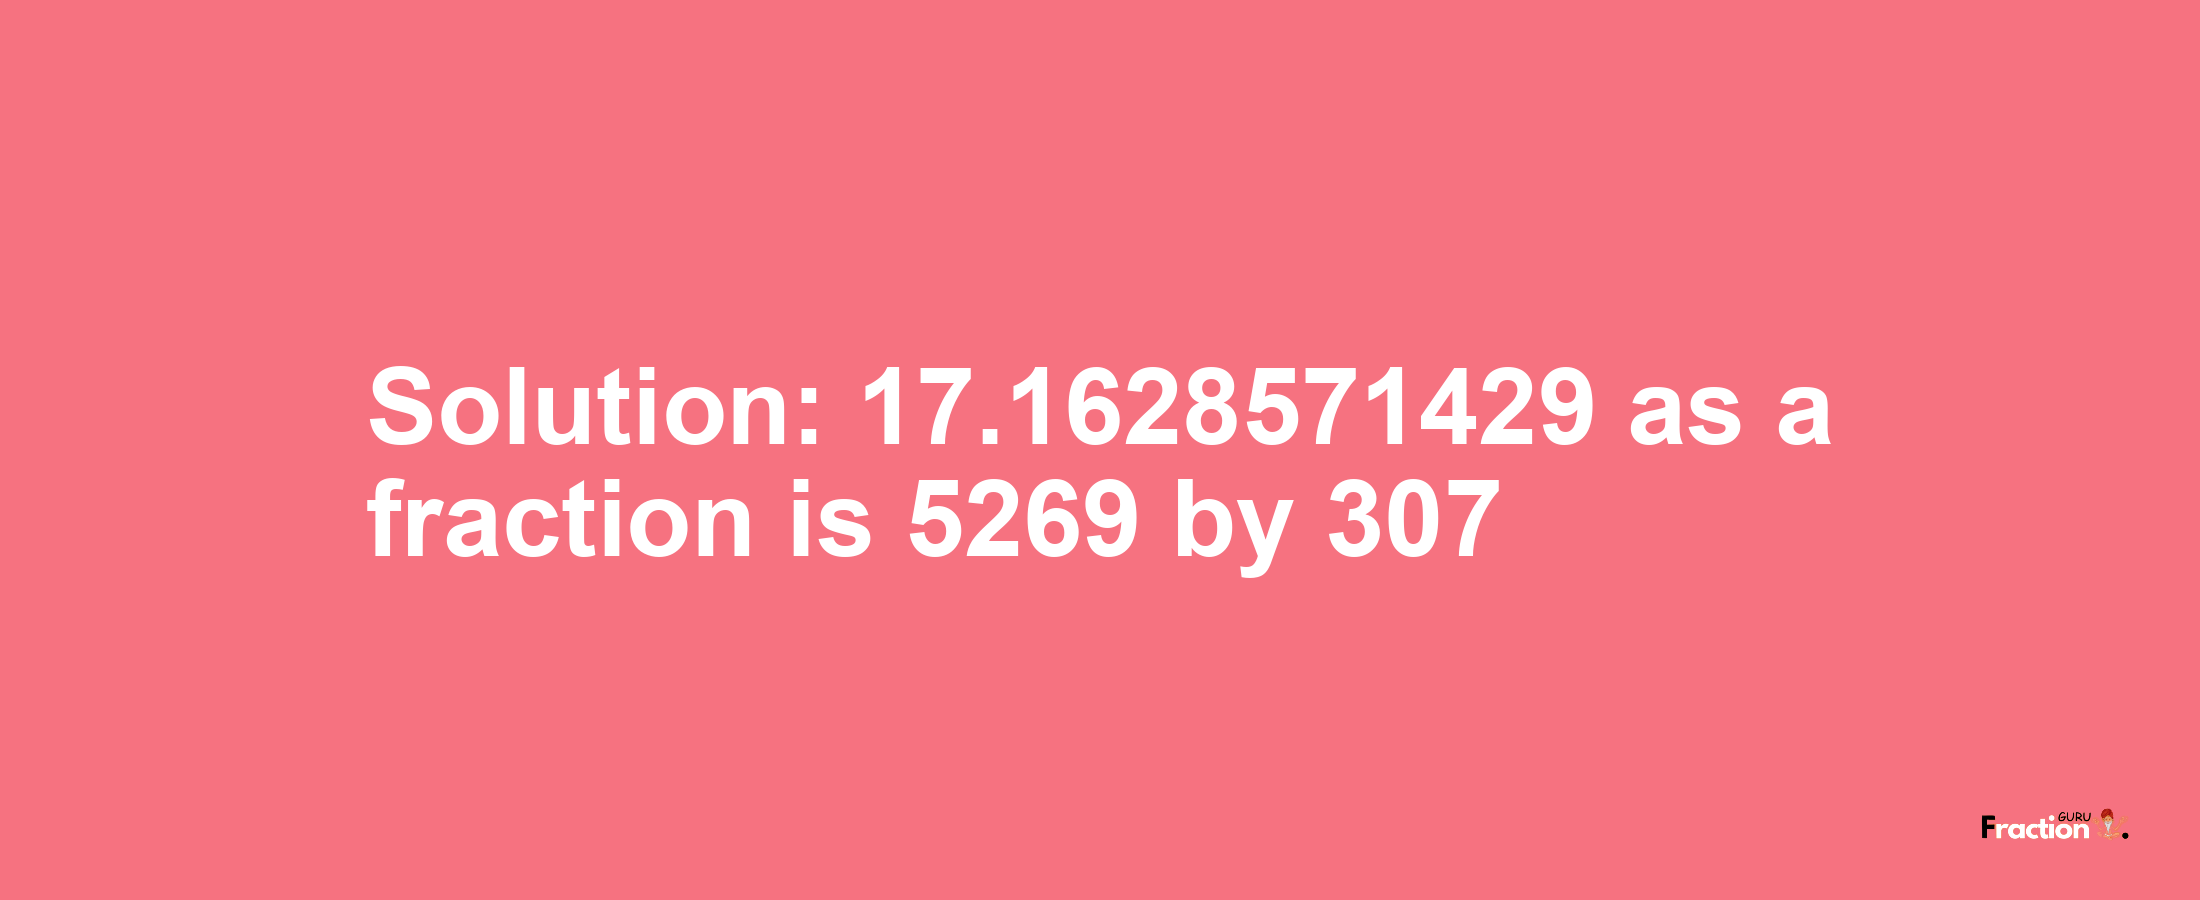 Solution:17.1628571429 as a fraction is 5269/307